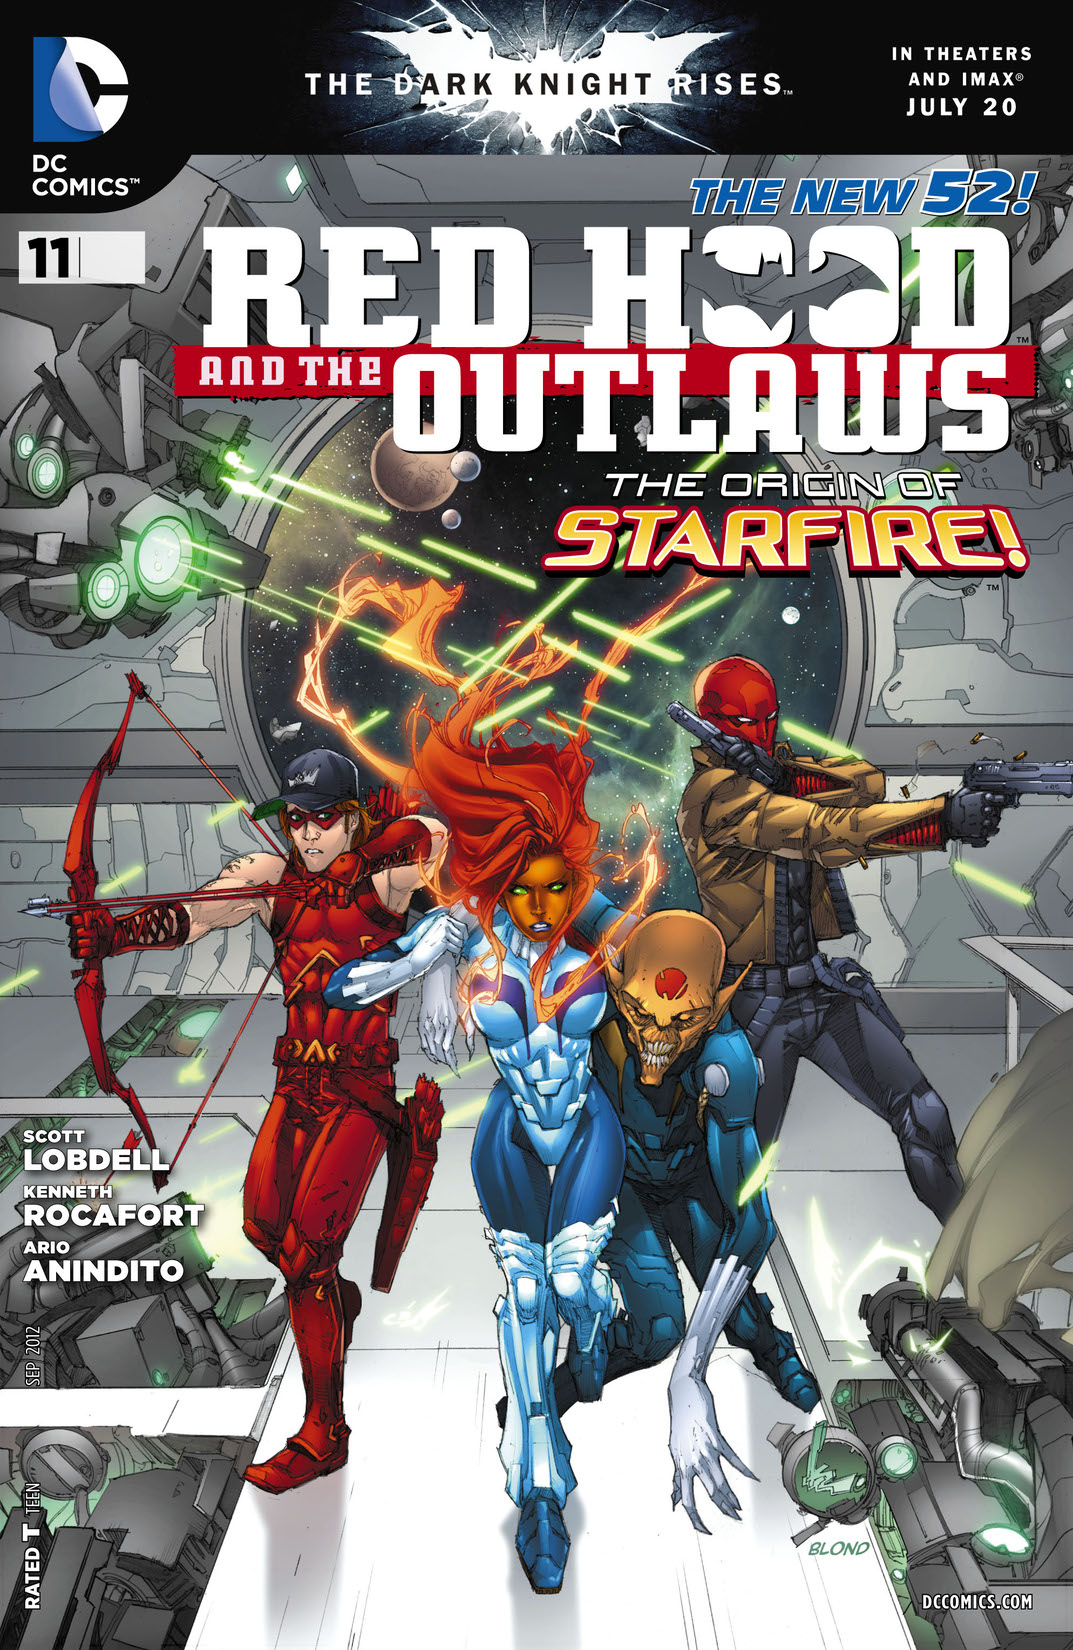 Red Hood and the Outlaws (2011-) #11 preview images